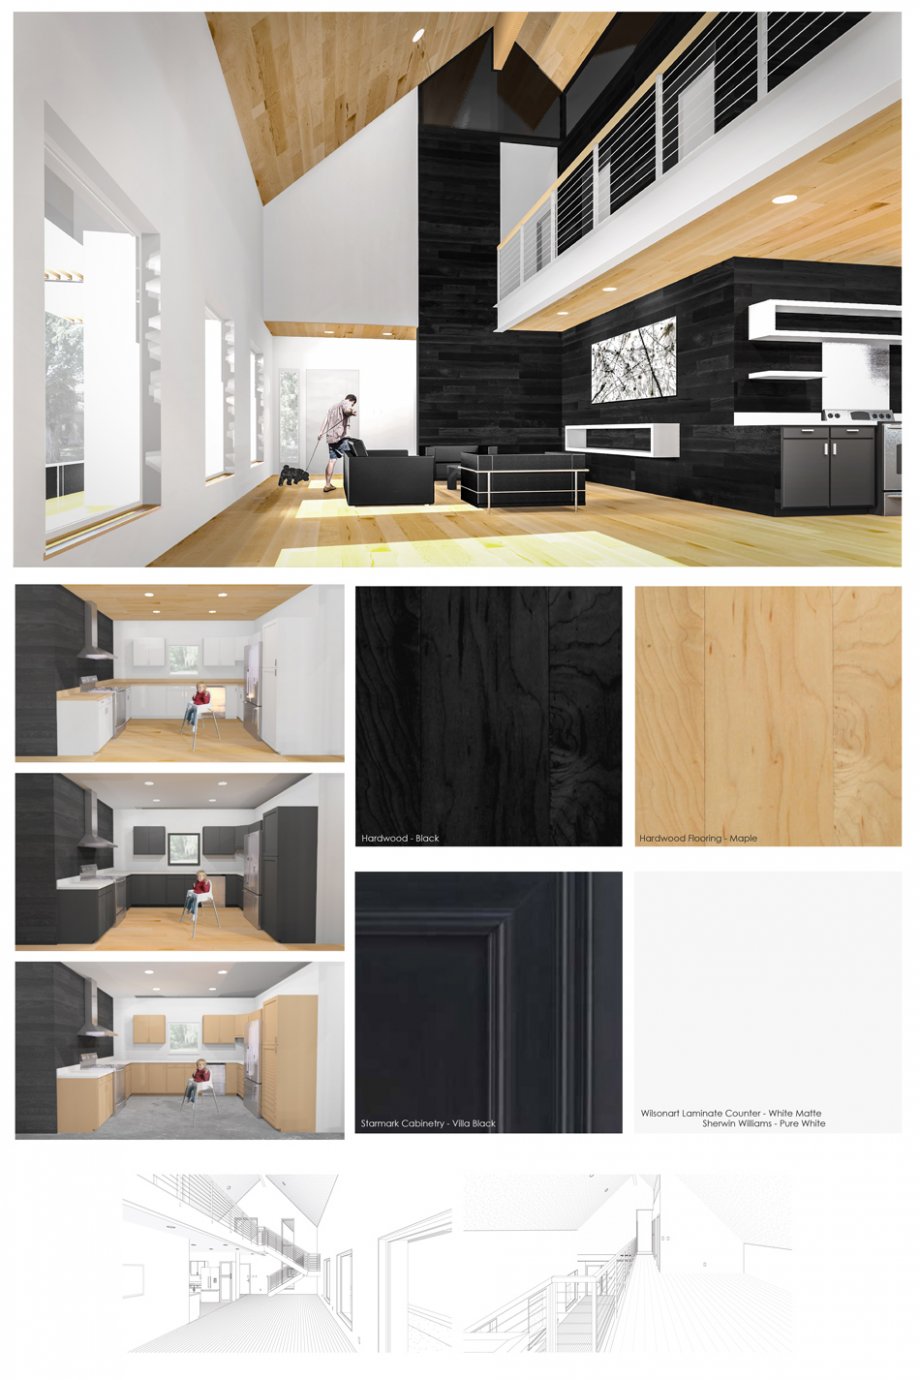 Interior palette and multiple renderings showing options.